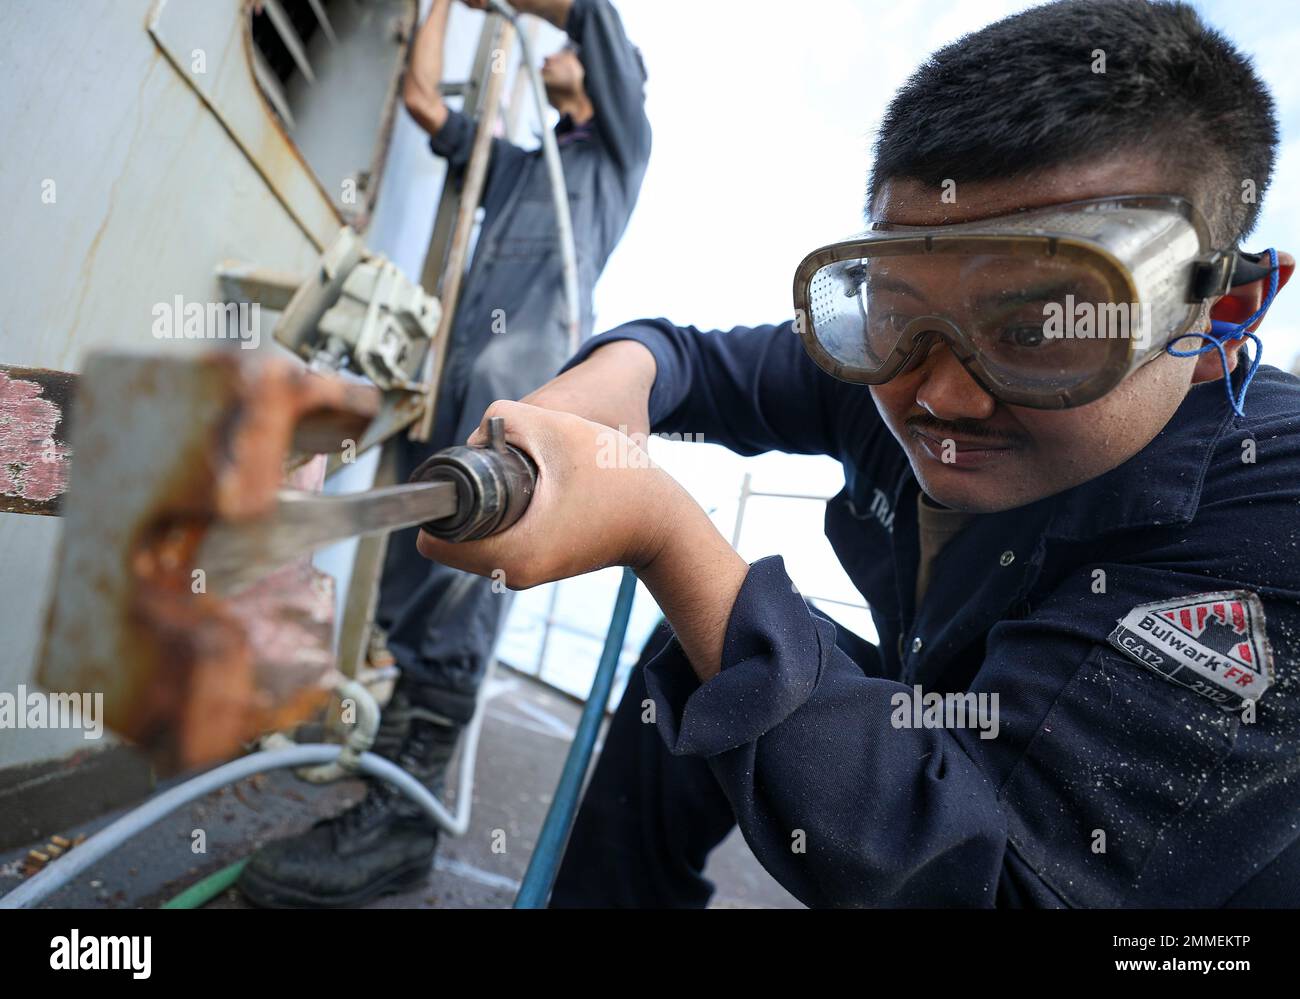 PHILIPPINE SEA (Sept. 16, 2022) – Fireman Kenny Tran, from Jacksonville, Florida, conducts maintenance aboard Arleigh Burke-class guided-missile destroyer USS Barry (DDG 52) while operating in the Philippine Sea, Sept. 16. Barry is assigned to Commander, Task Force 71/Destroyer Squadron (DESRON) 15, the Navy’s largest forward-deployed DESRON and the U.S. 7th Fleet’s principal surface force. Stock Photo